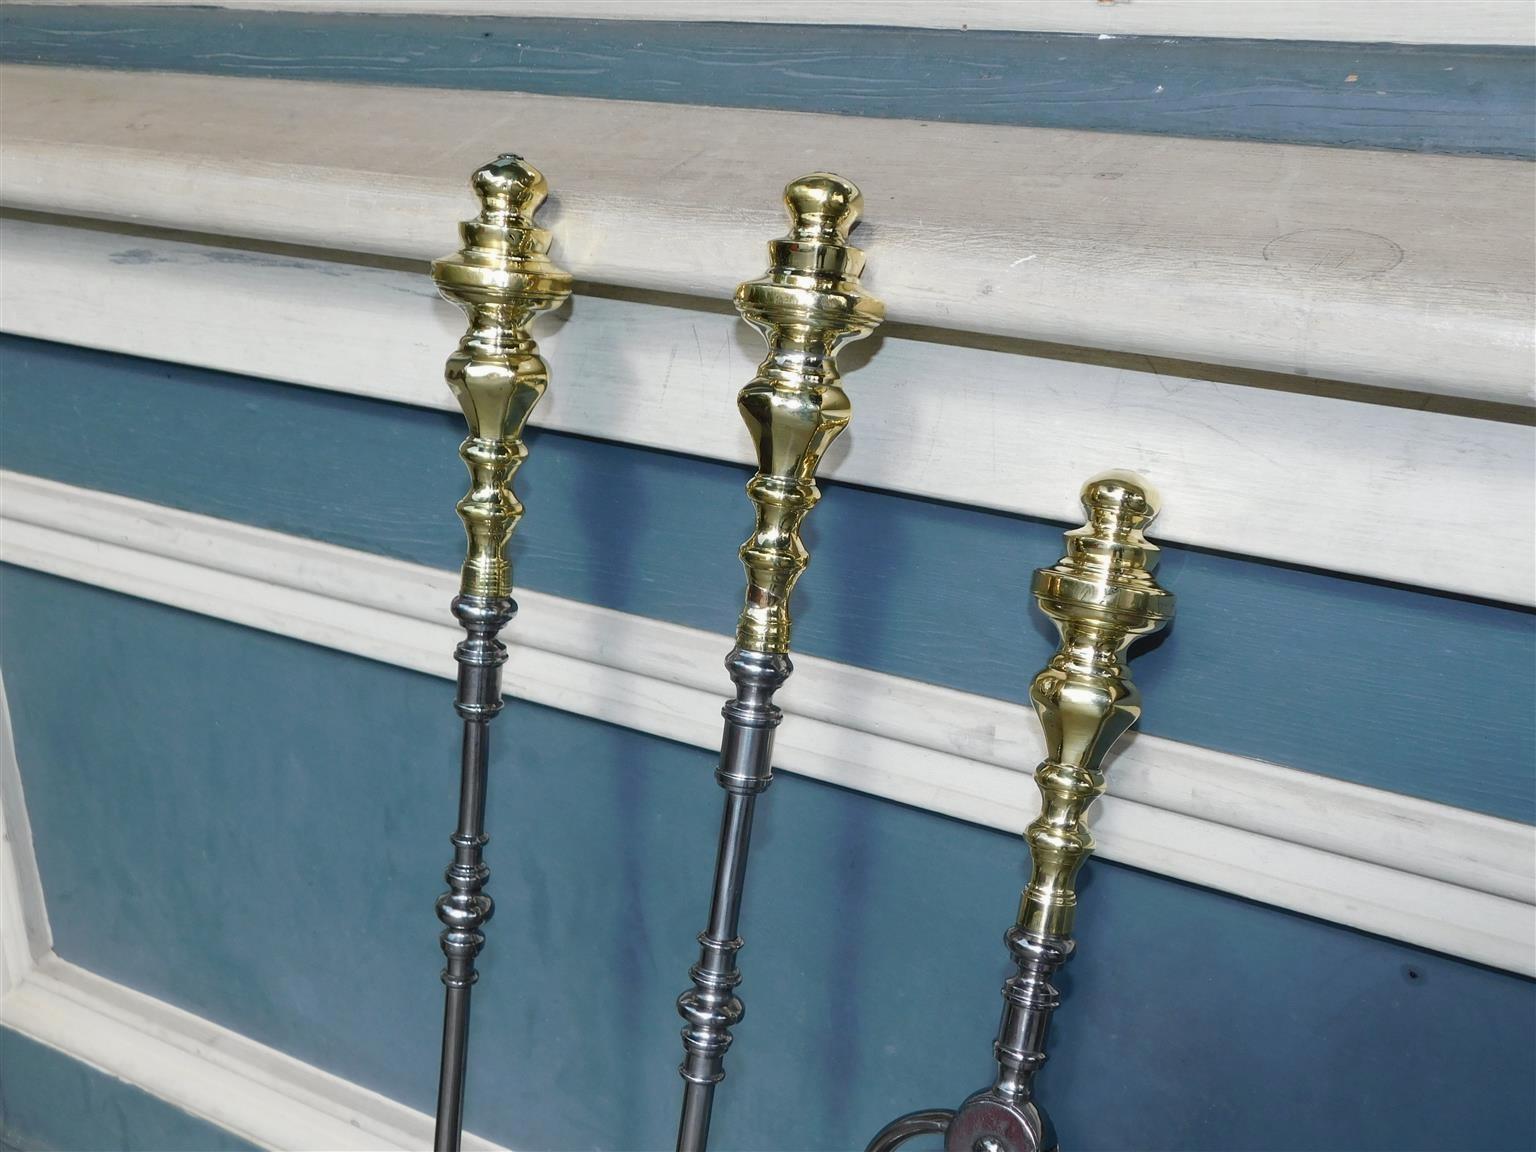 Cast Set of American Brass Finial and Polished Steel Fire Place Tools, Phil. C. 1810